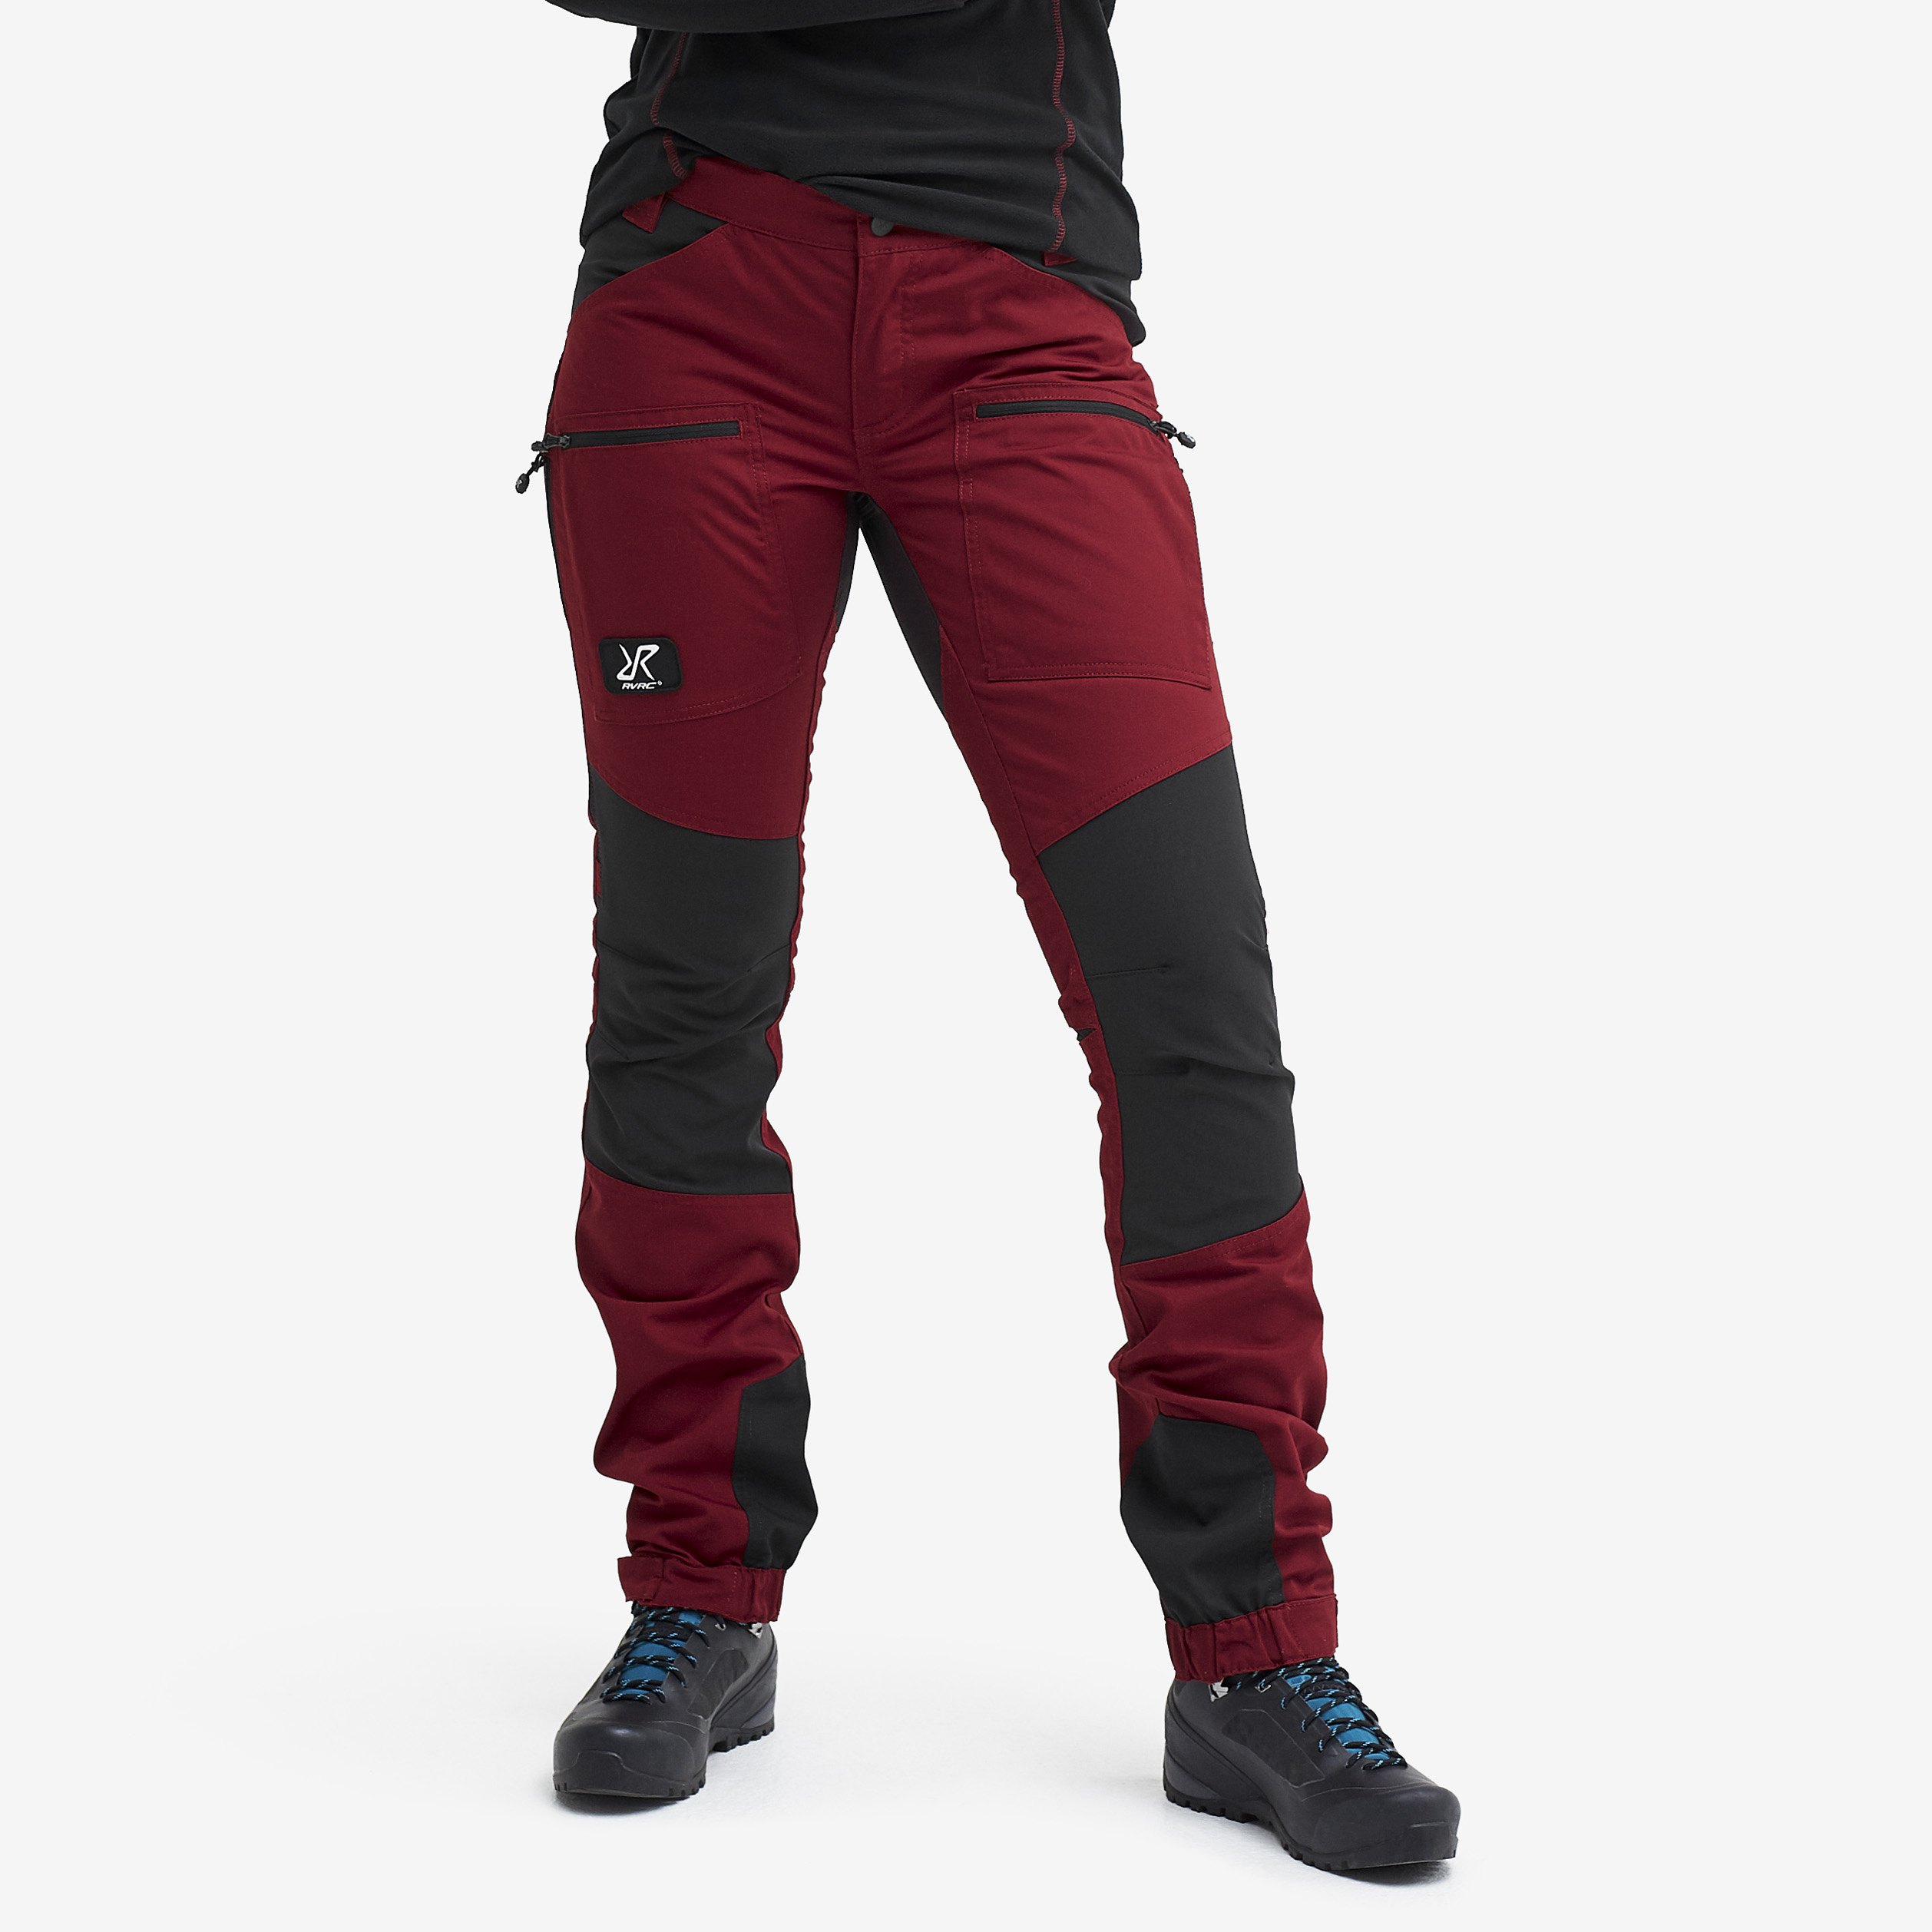 Nordwand Pro hiking trousers for women in red